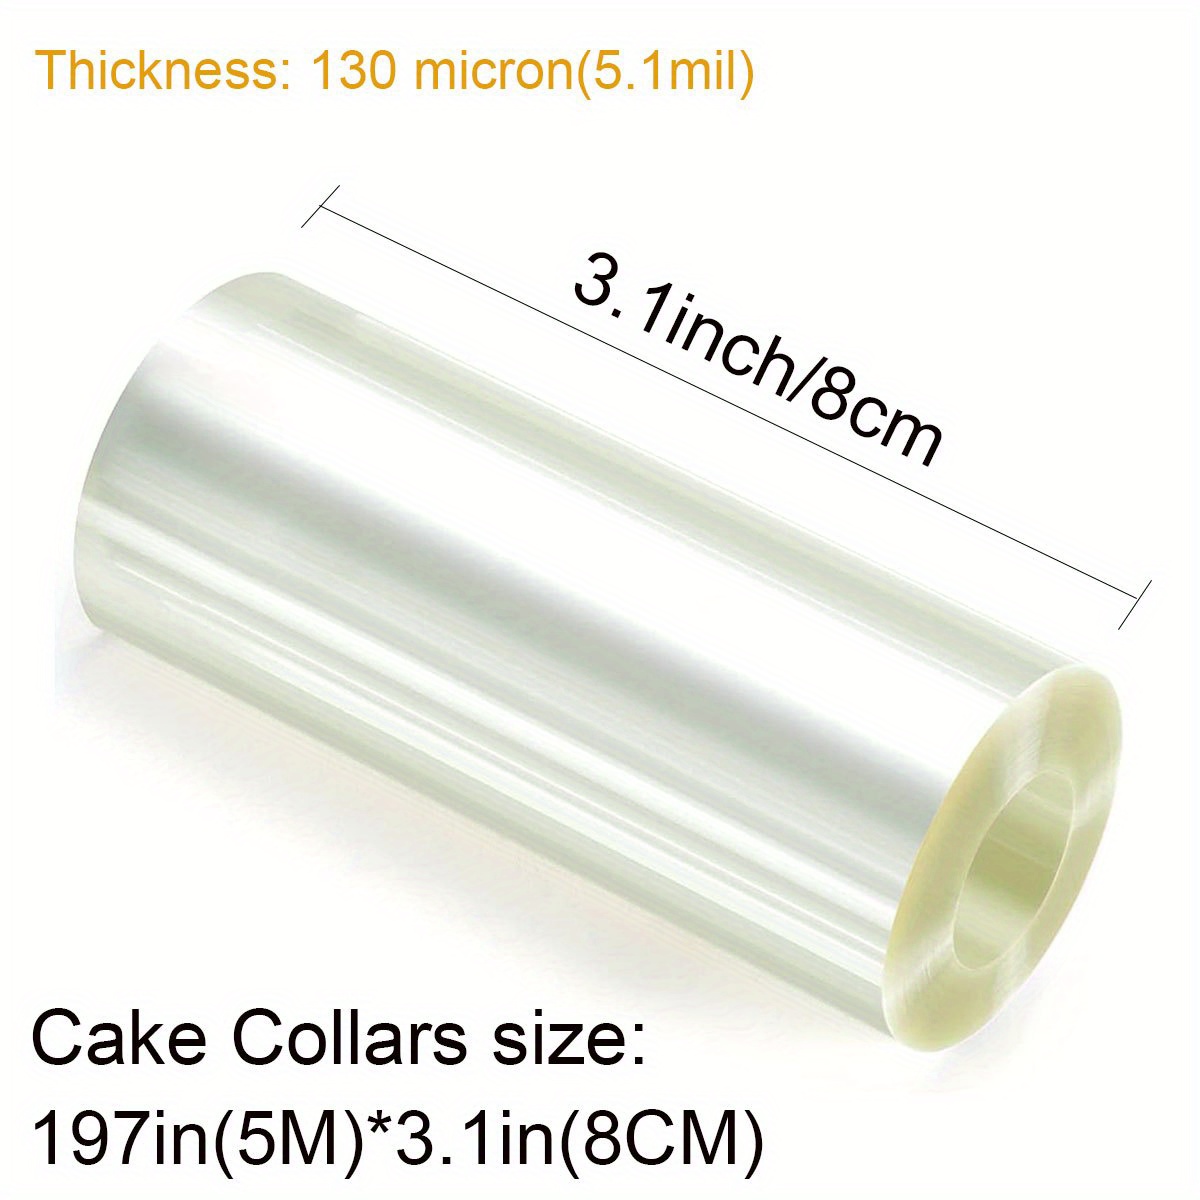 1pc transparent acetate cake collar roll for baking and decorating 4 x 197inch 394inch thick 130 microns perfect for chocolate mousse and mousse cake strips